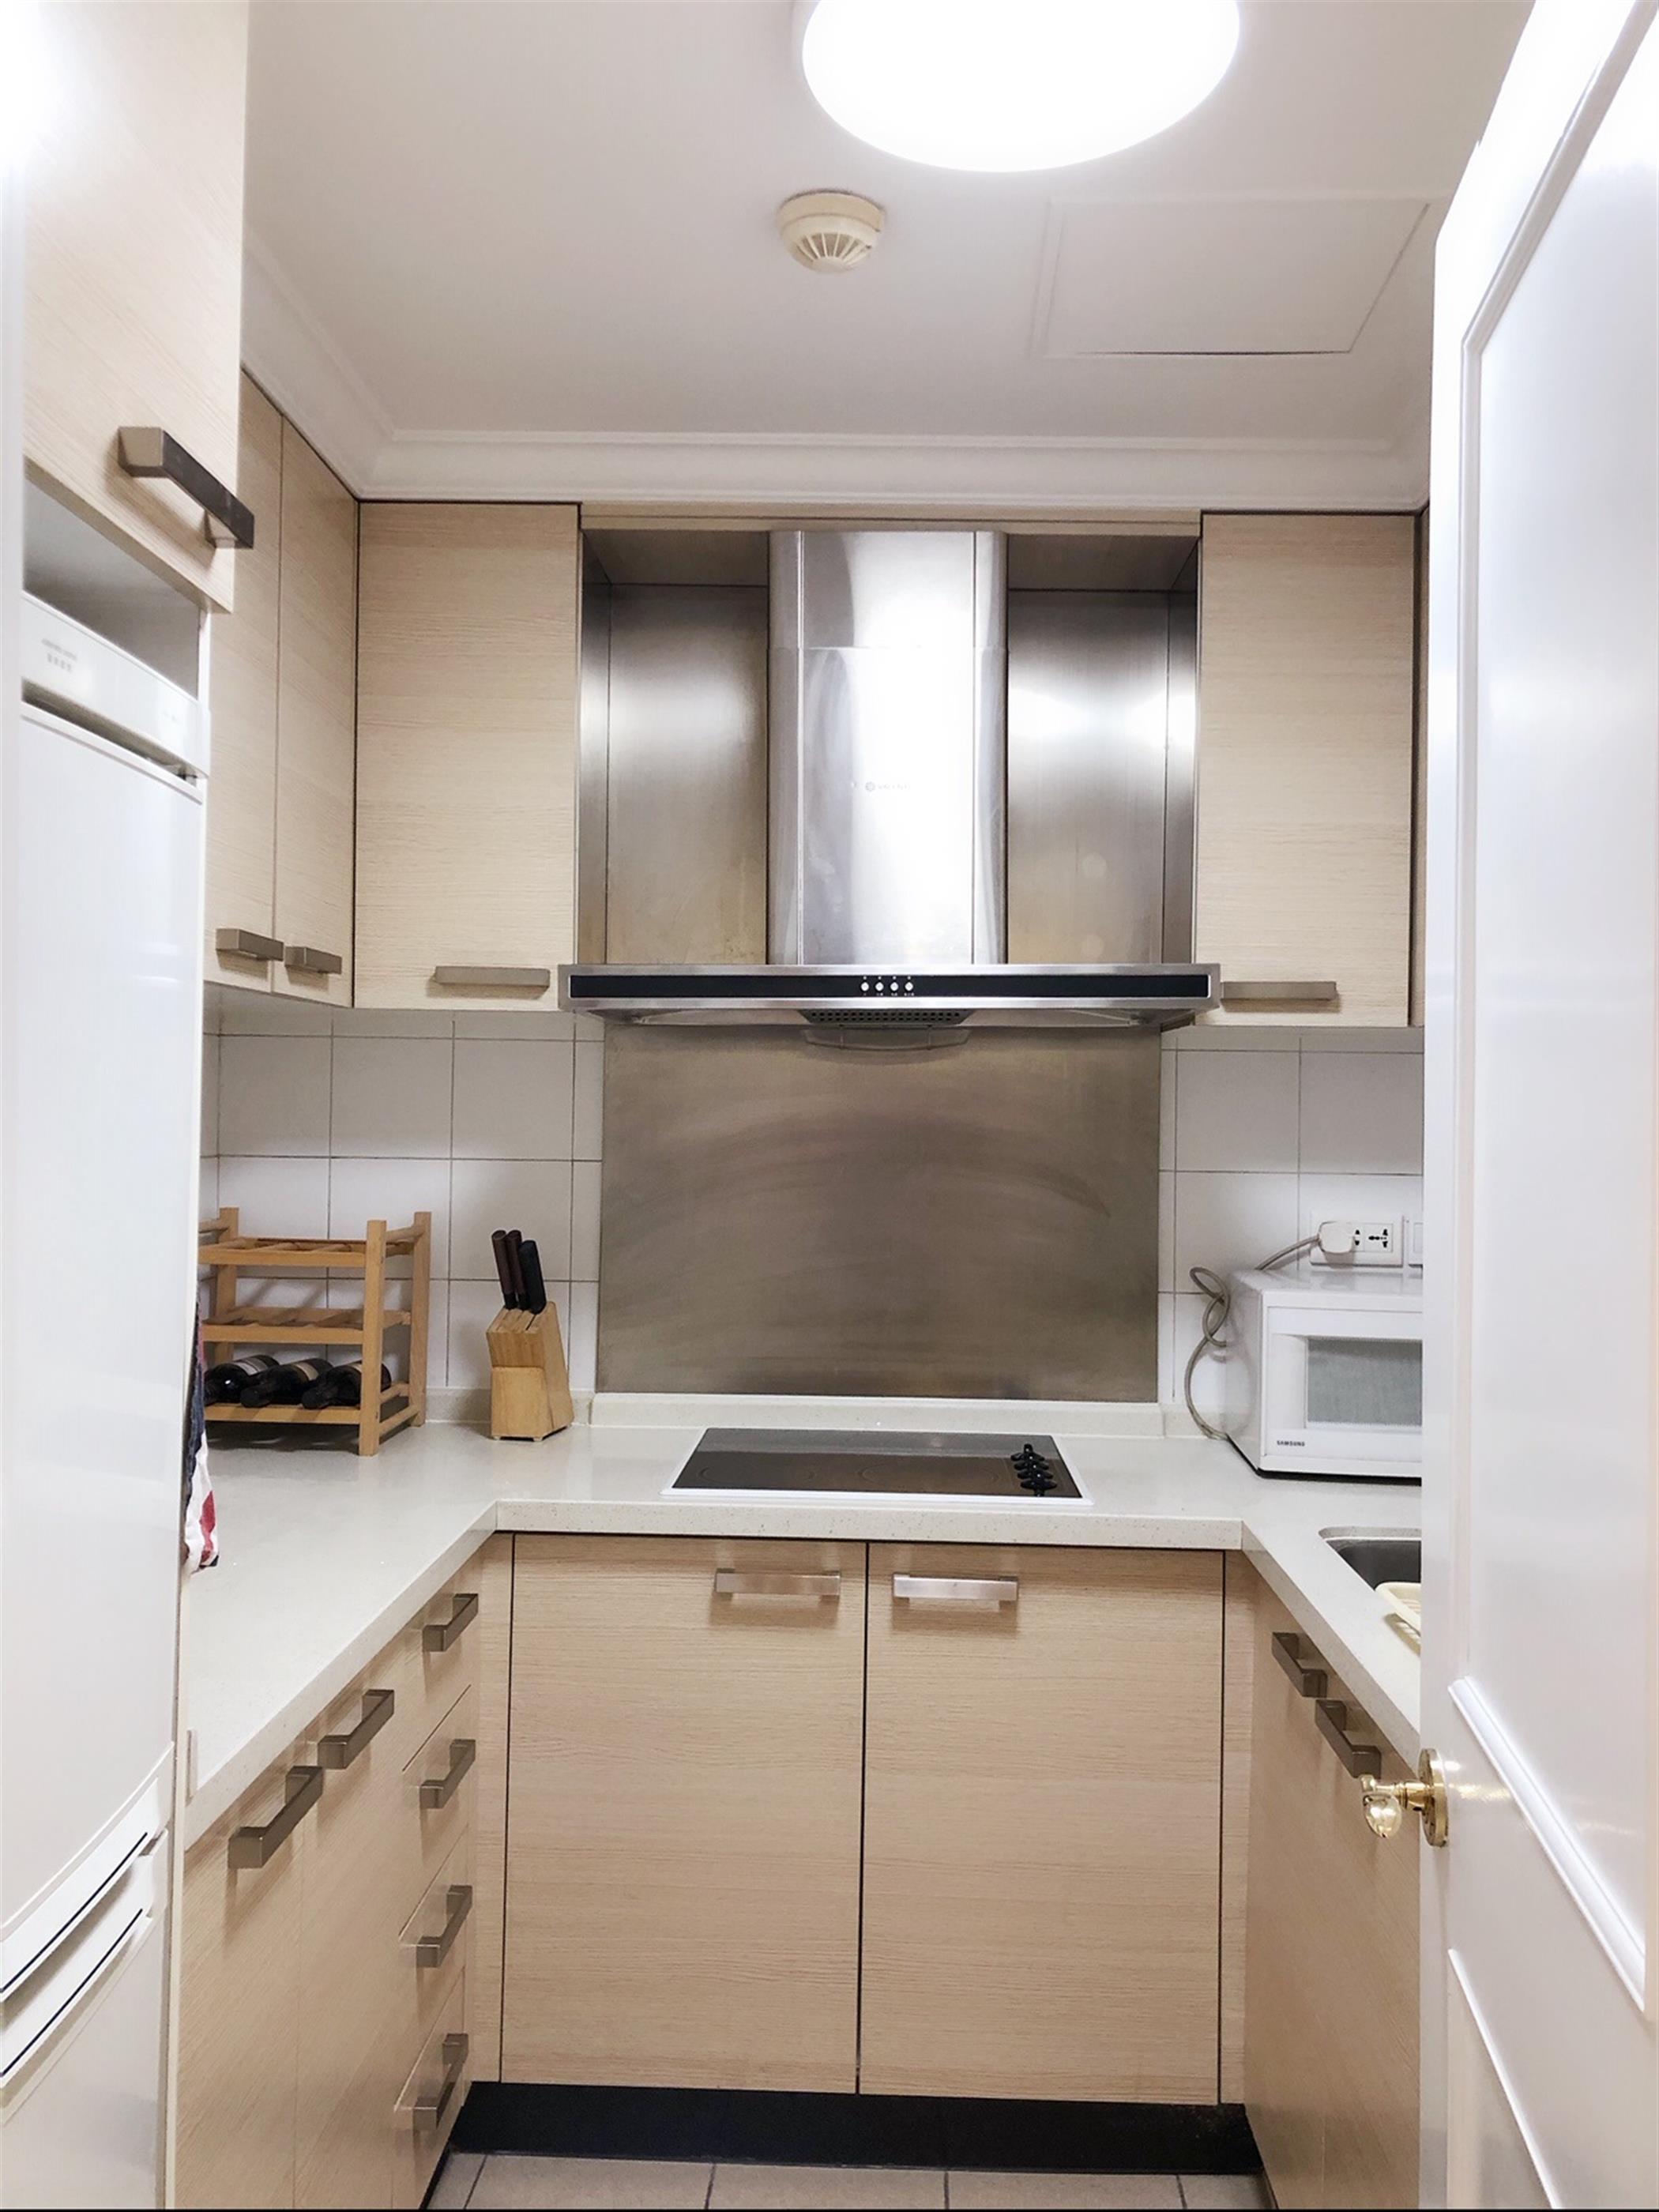 kitchen Newly-Renovated Prestigious FFC 1BR Apartment Nr LN 1 Hengshan Rd for Rent in Shanghai